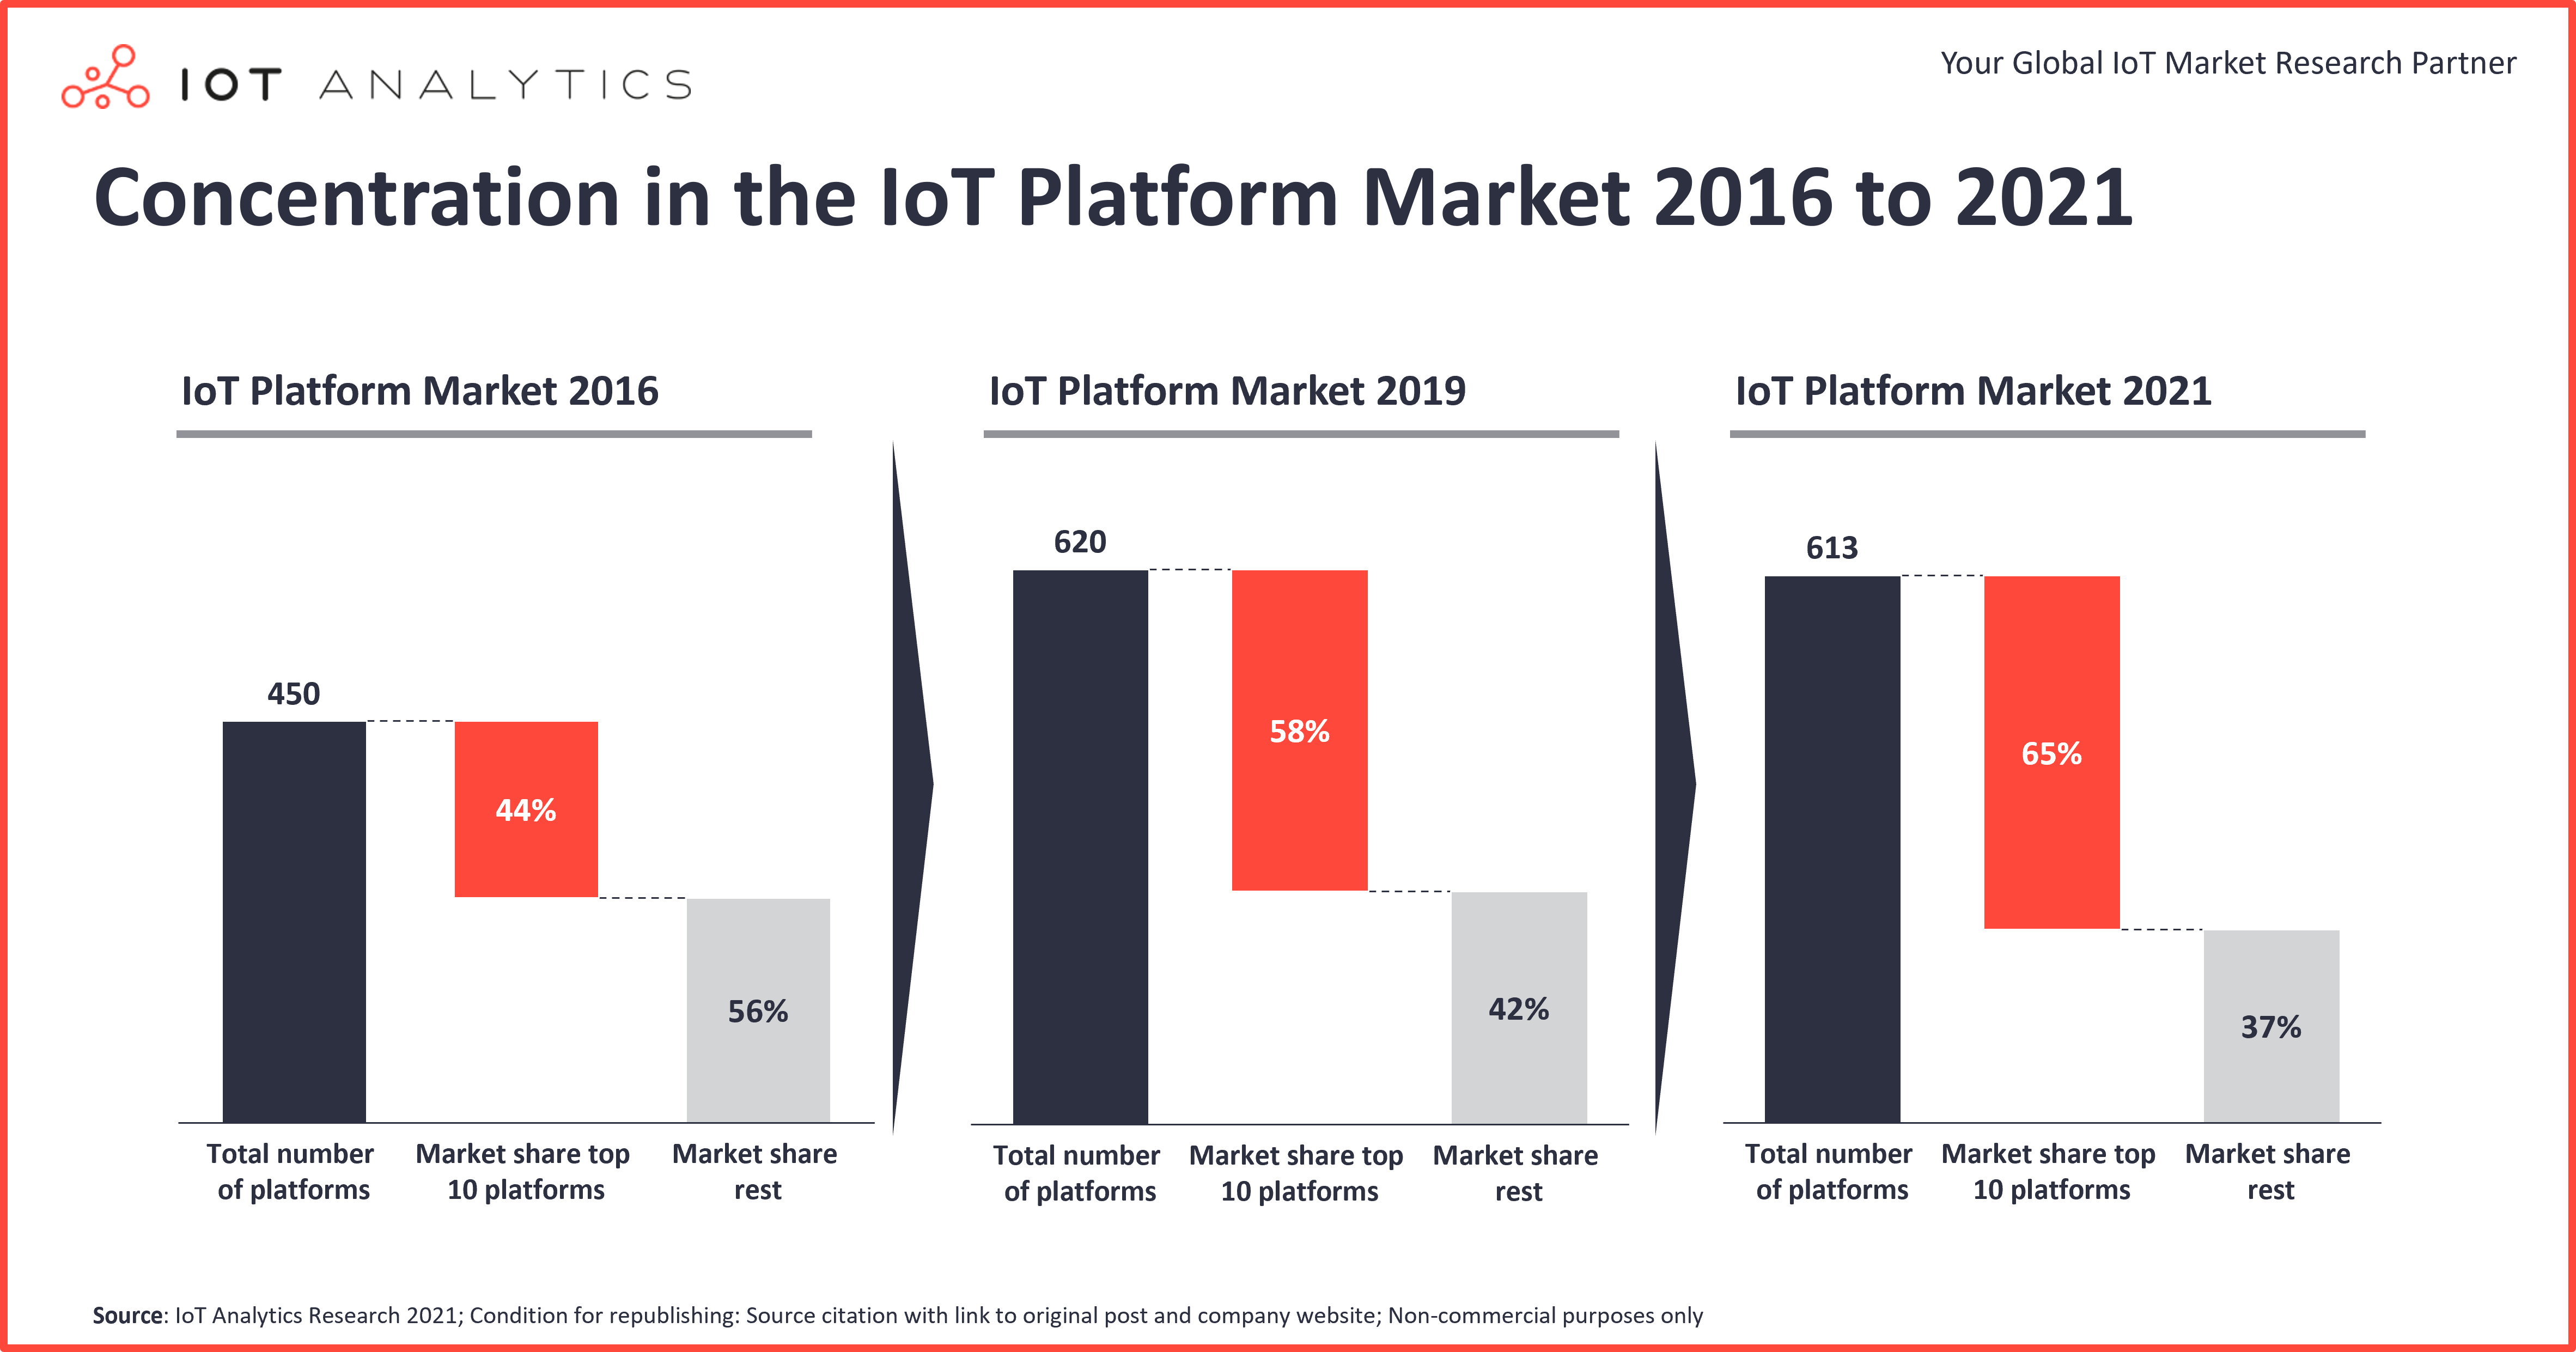 Concentration in the IoT Platform Market 2016 to 2021